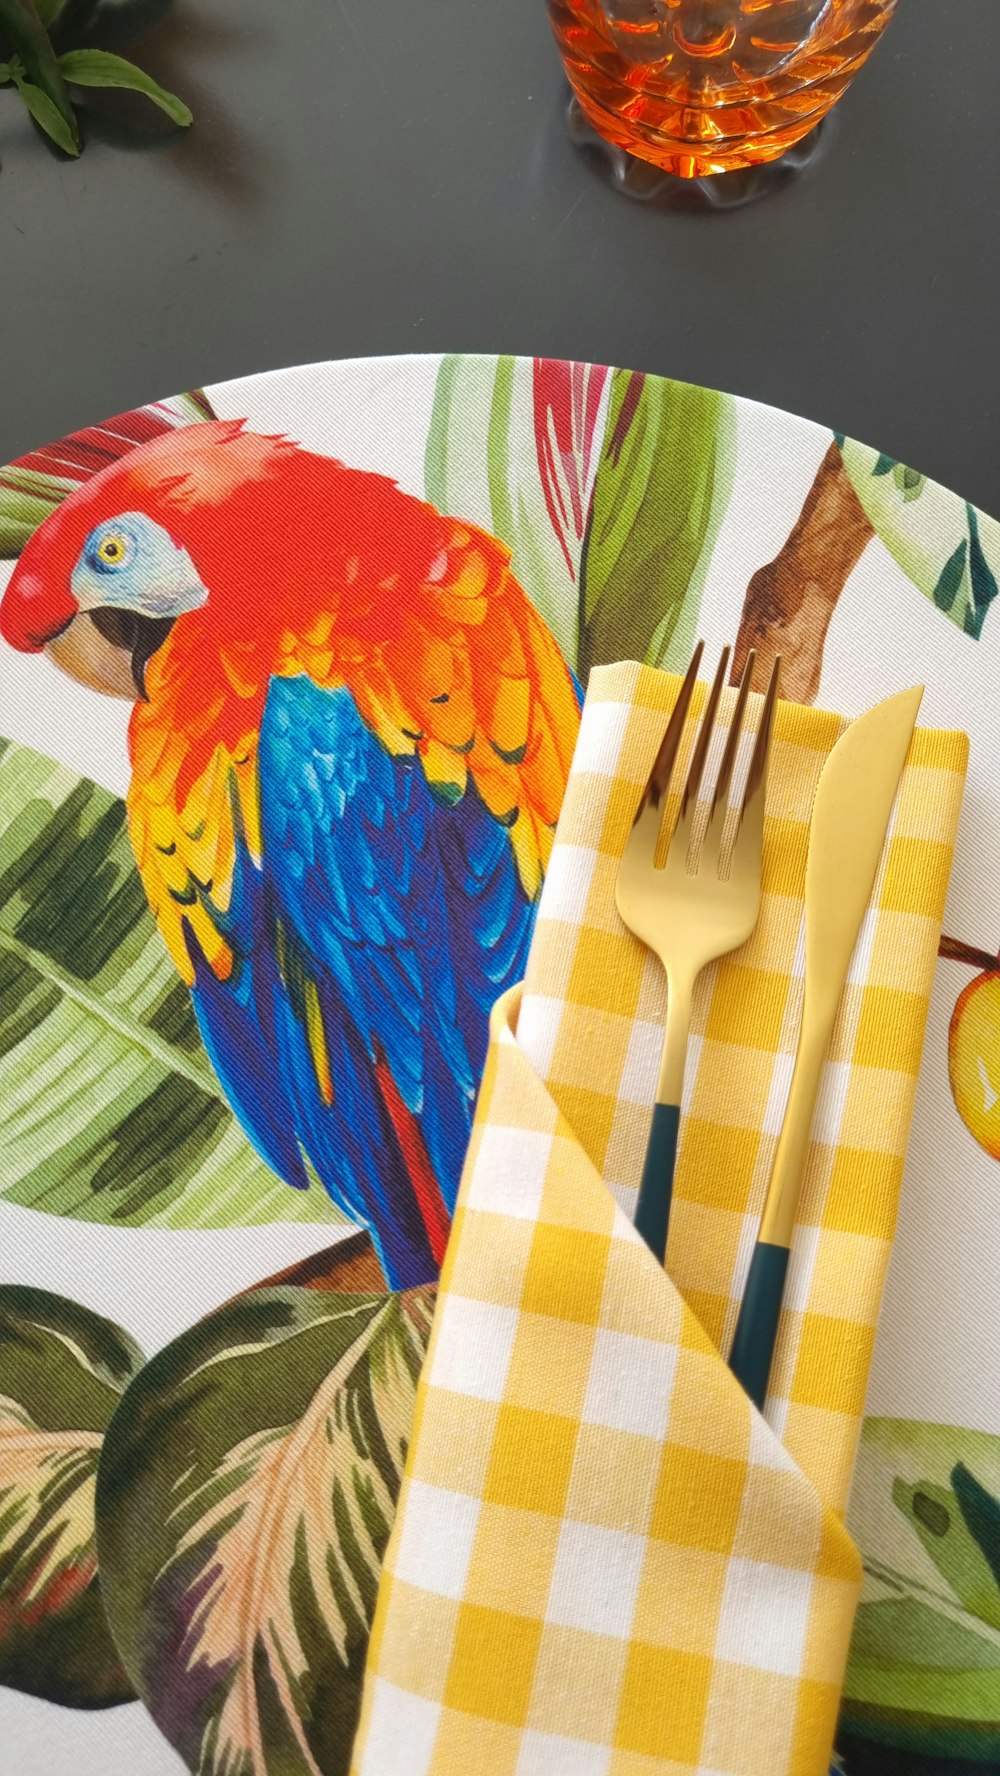 a plate with a yellow and blue parrot on it